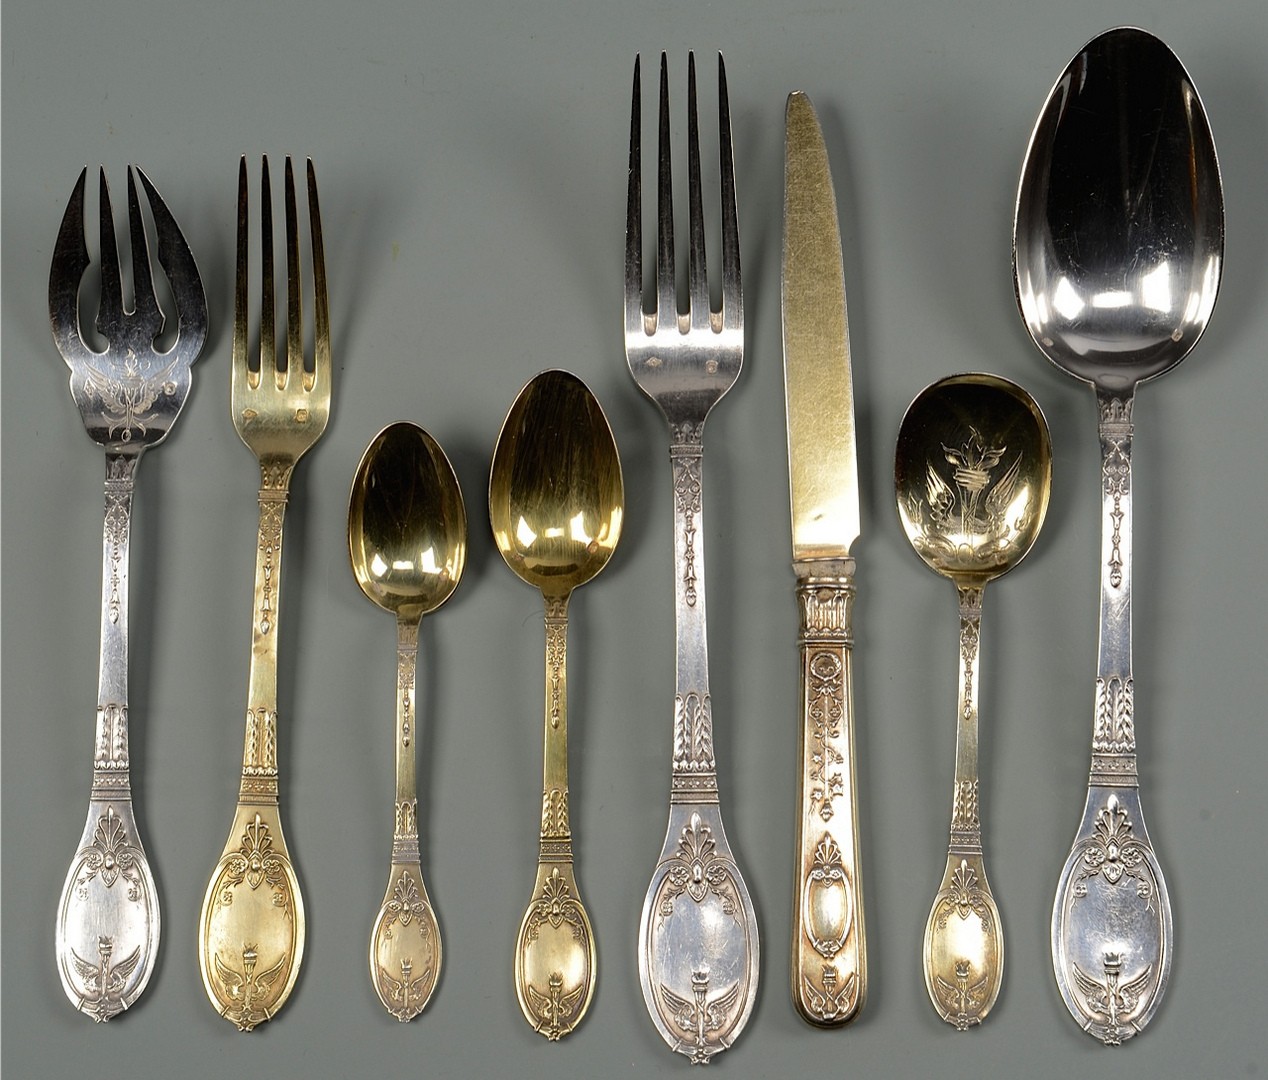 Lot 41: 148 pcs French Silver Flatware with crests